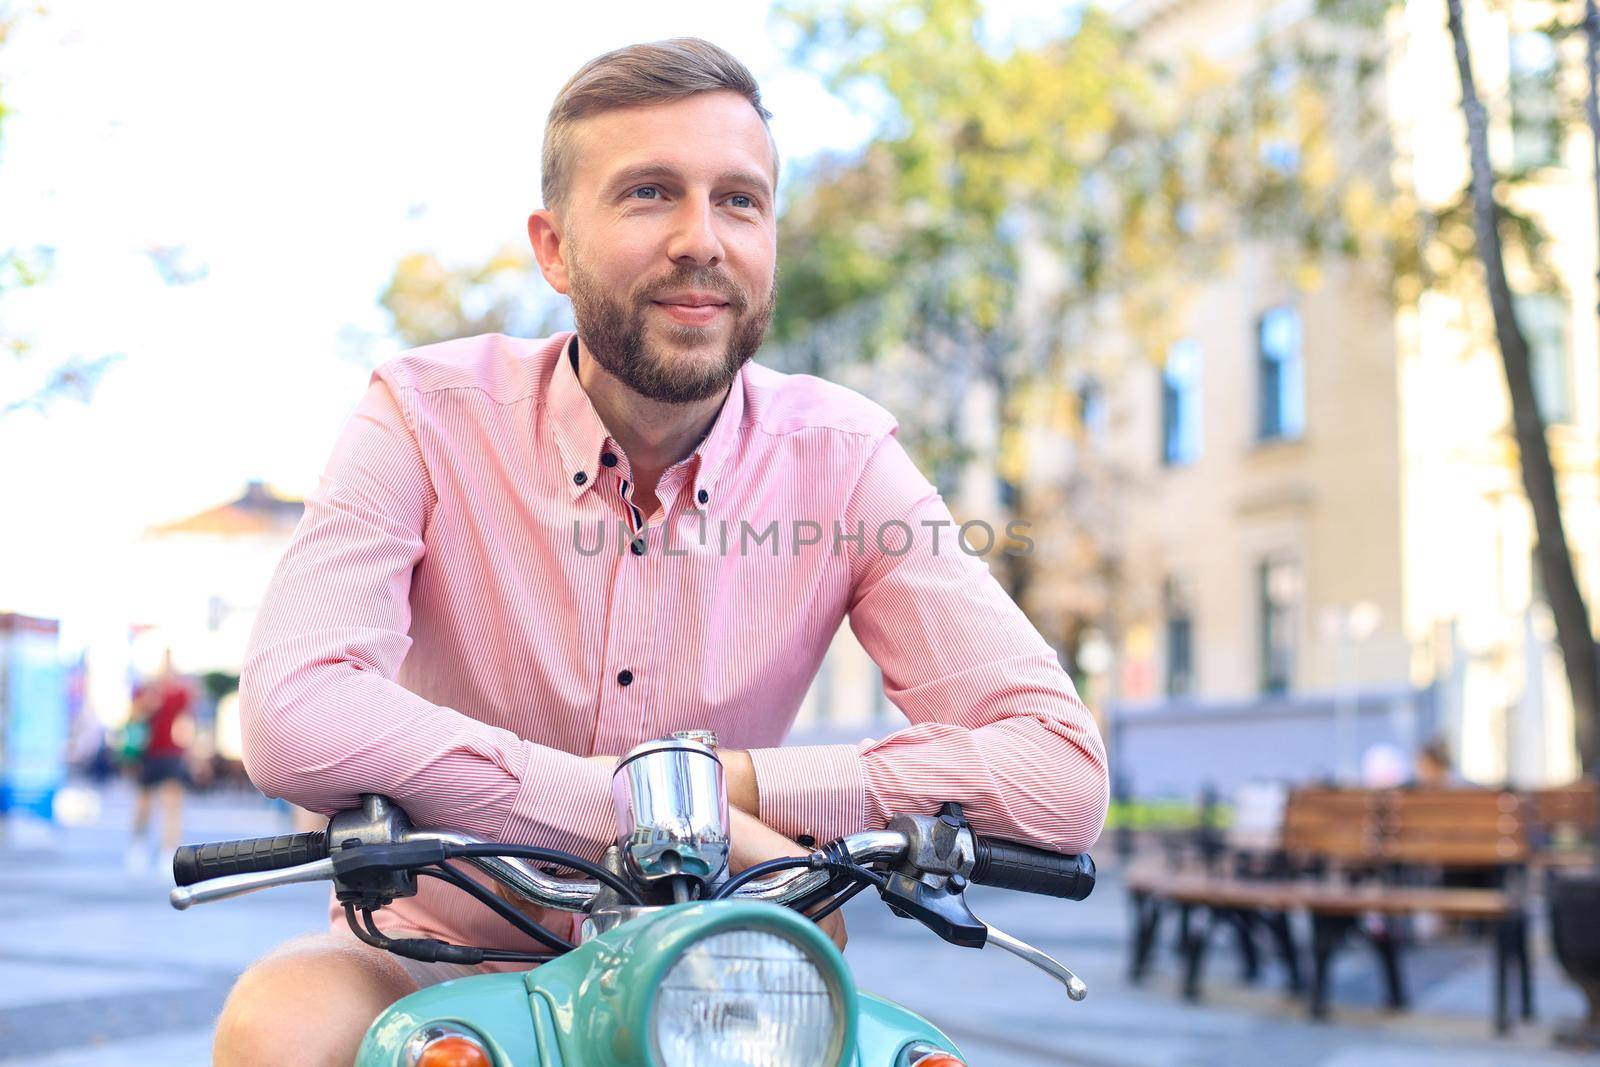 Handsome man posing on a scooter in a vacation context. Street fashion and style